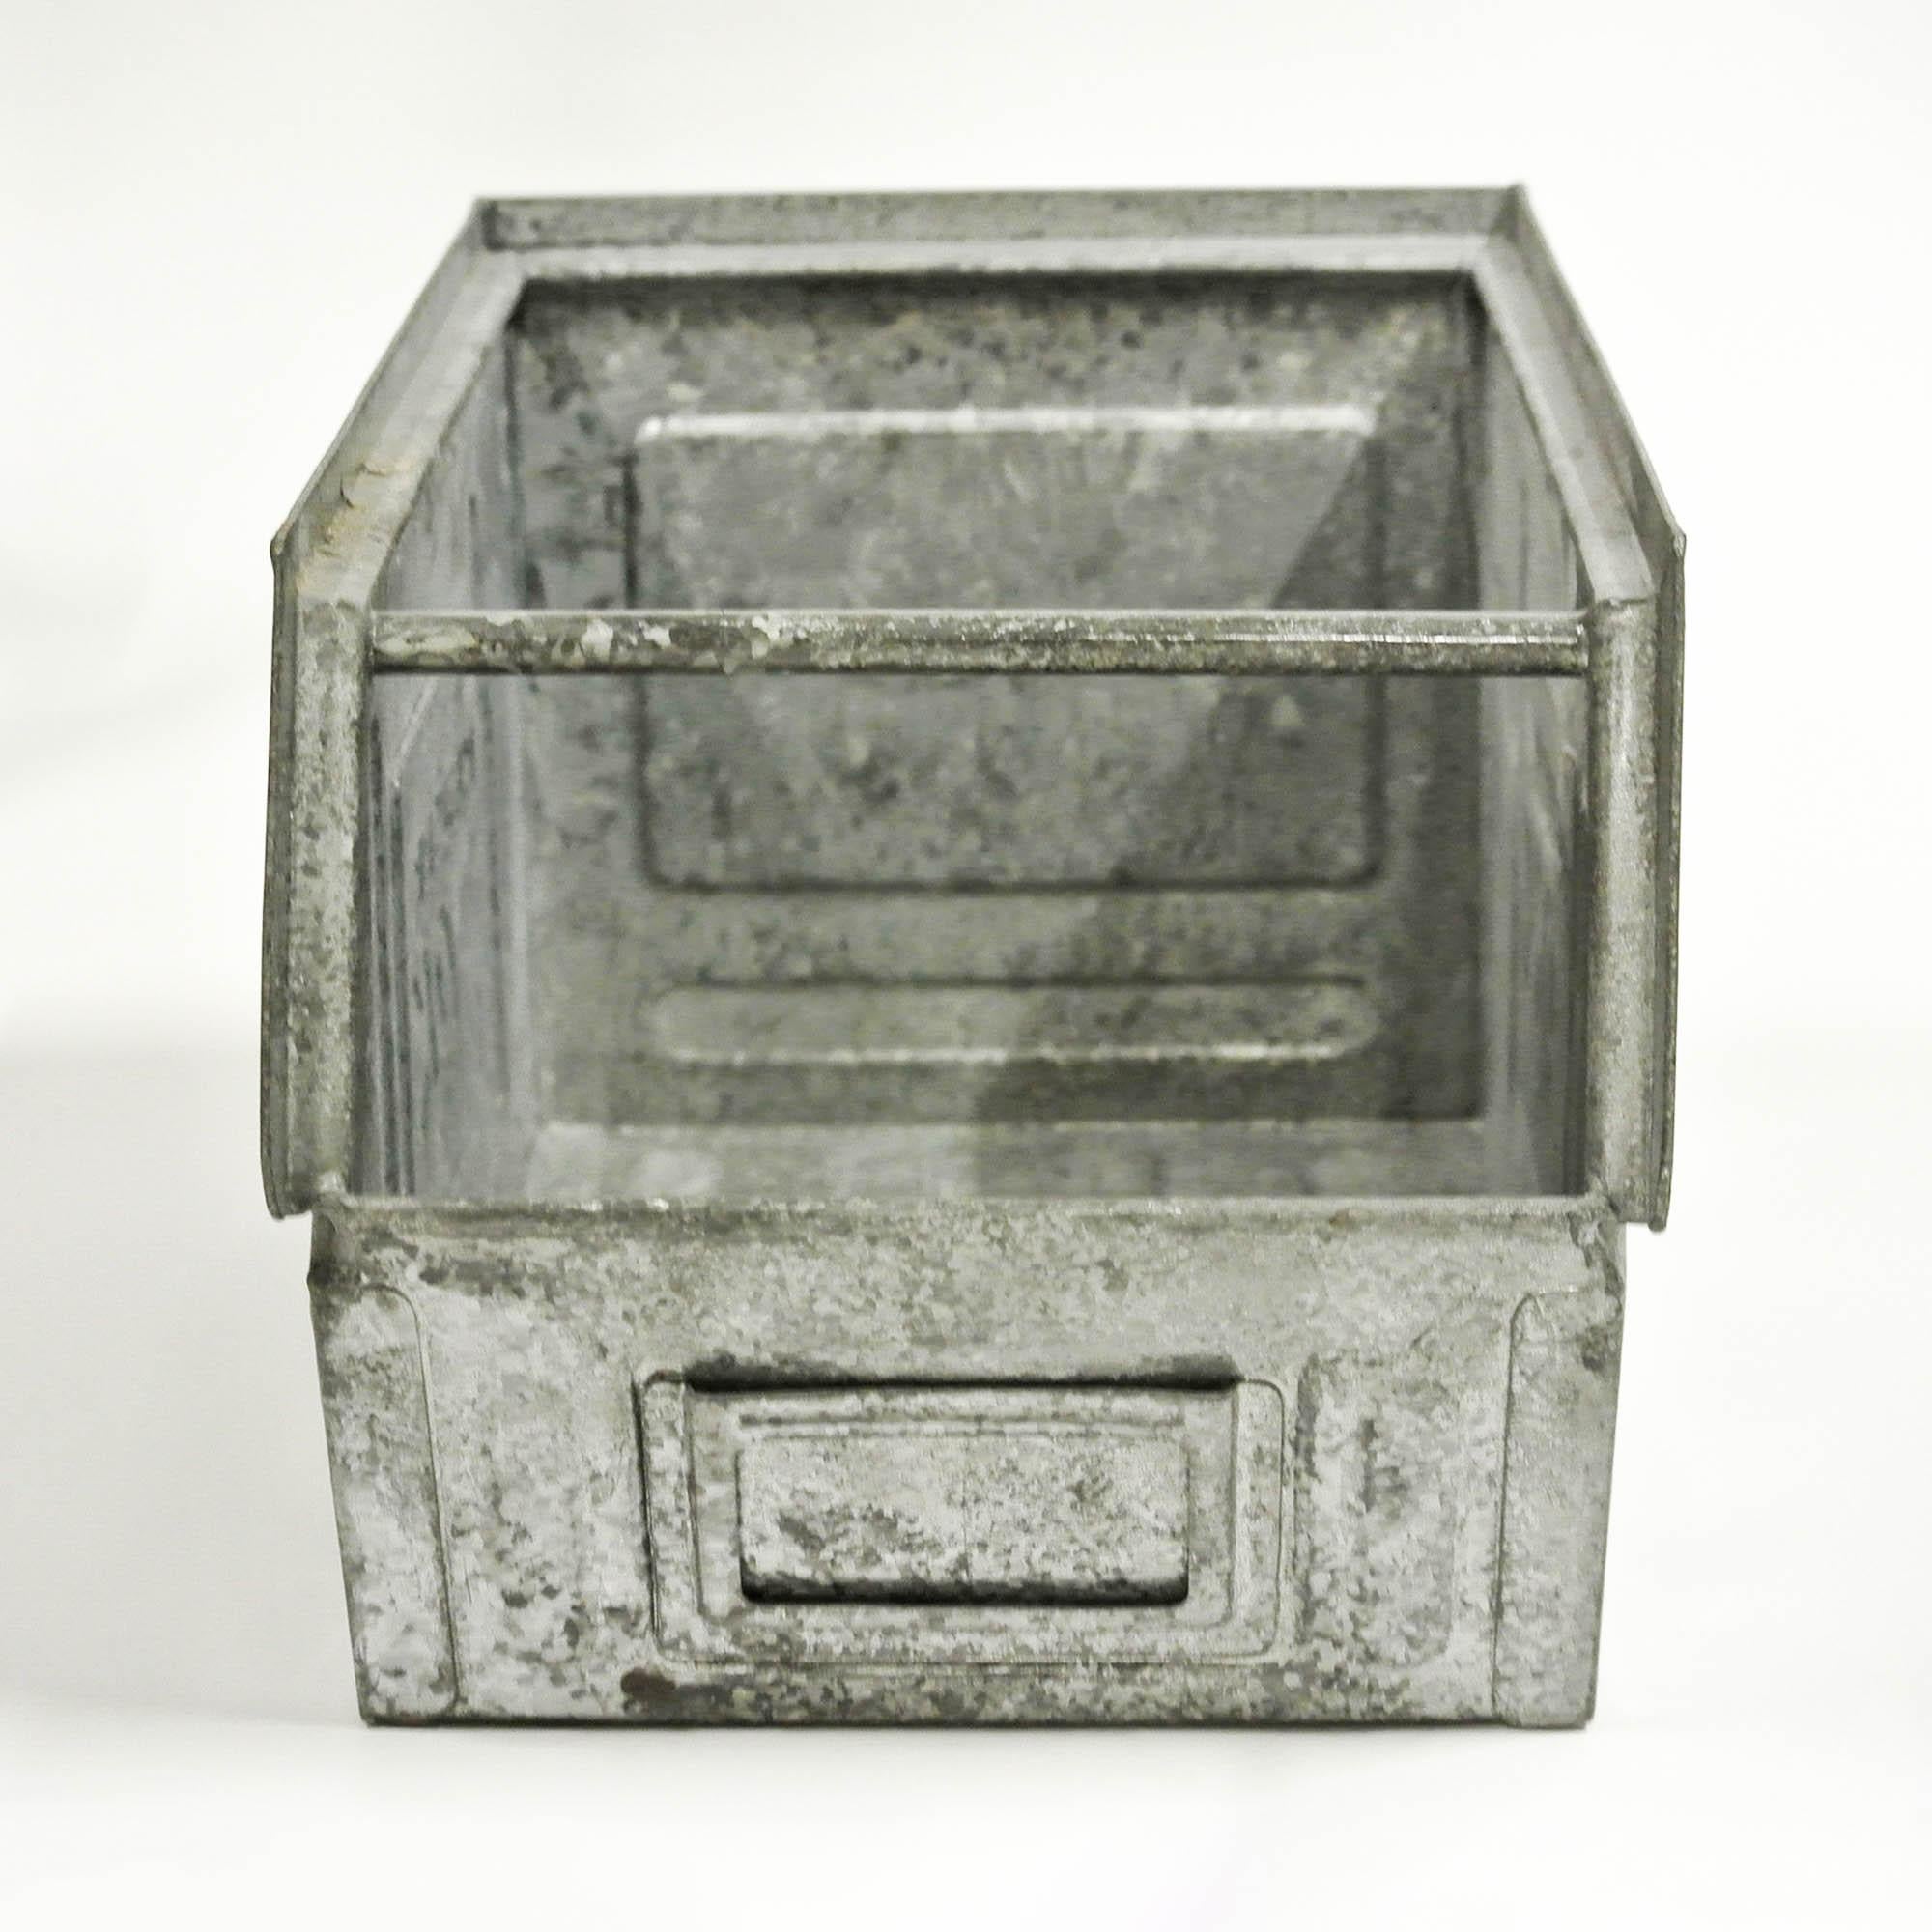 Industrial Small Galvanized Metallic Crates ‘Varnished’, France, circa 1950